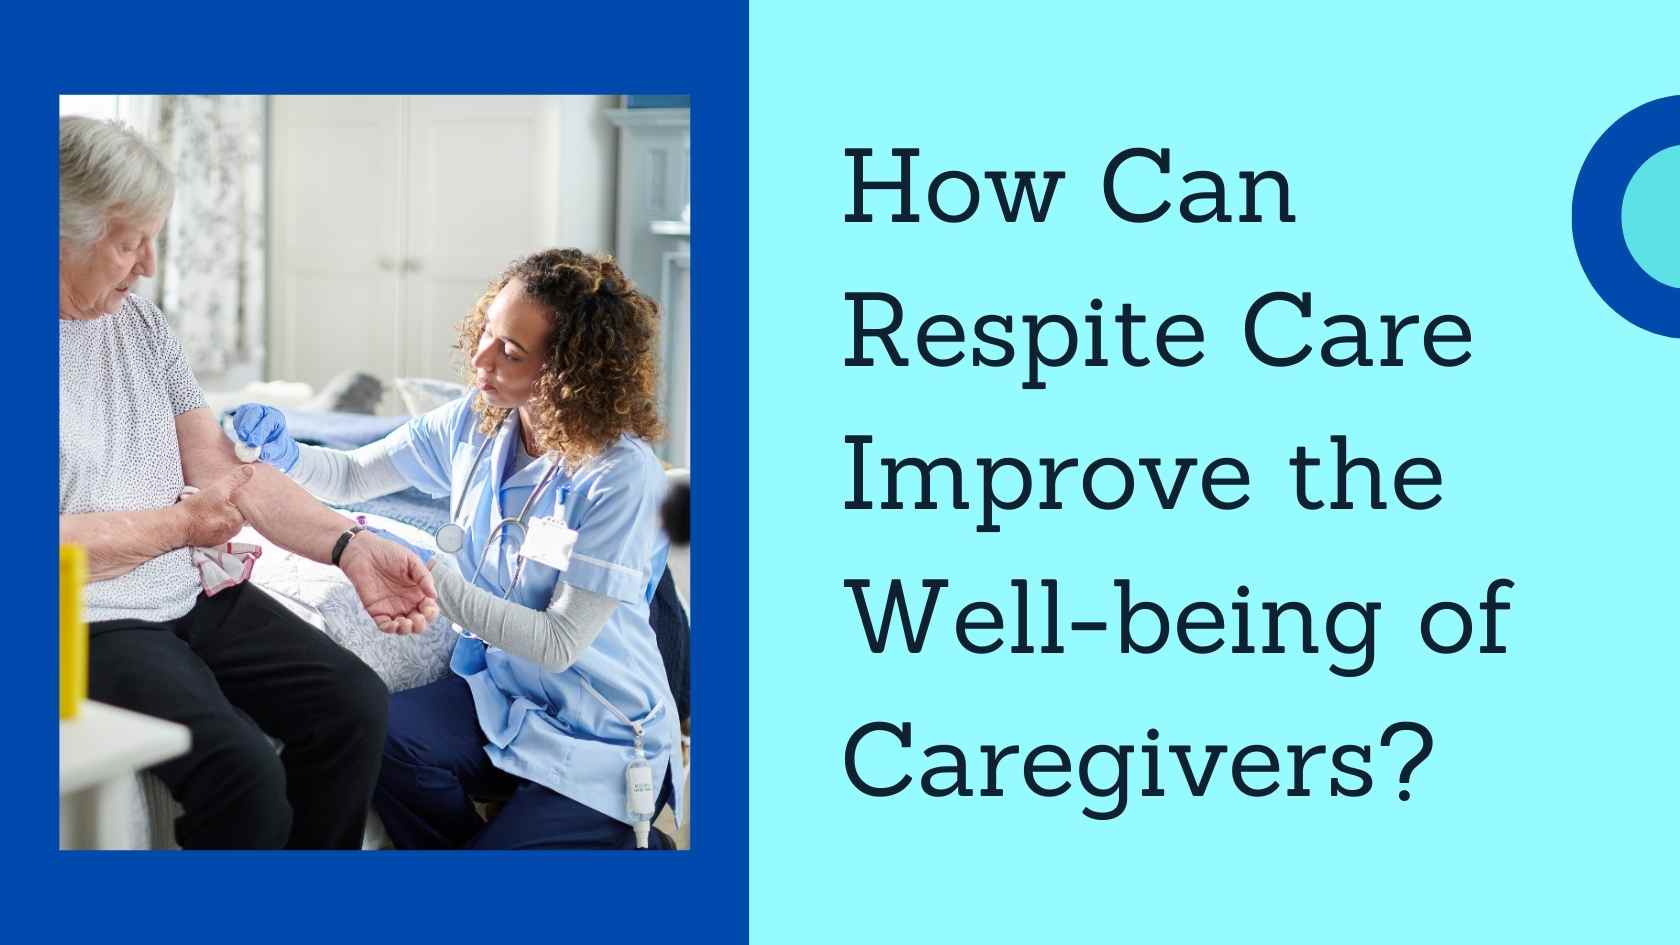 How Can Respite Care Improve the Well-being of Caregivers?